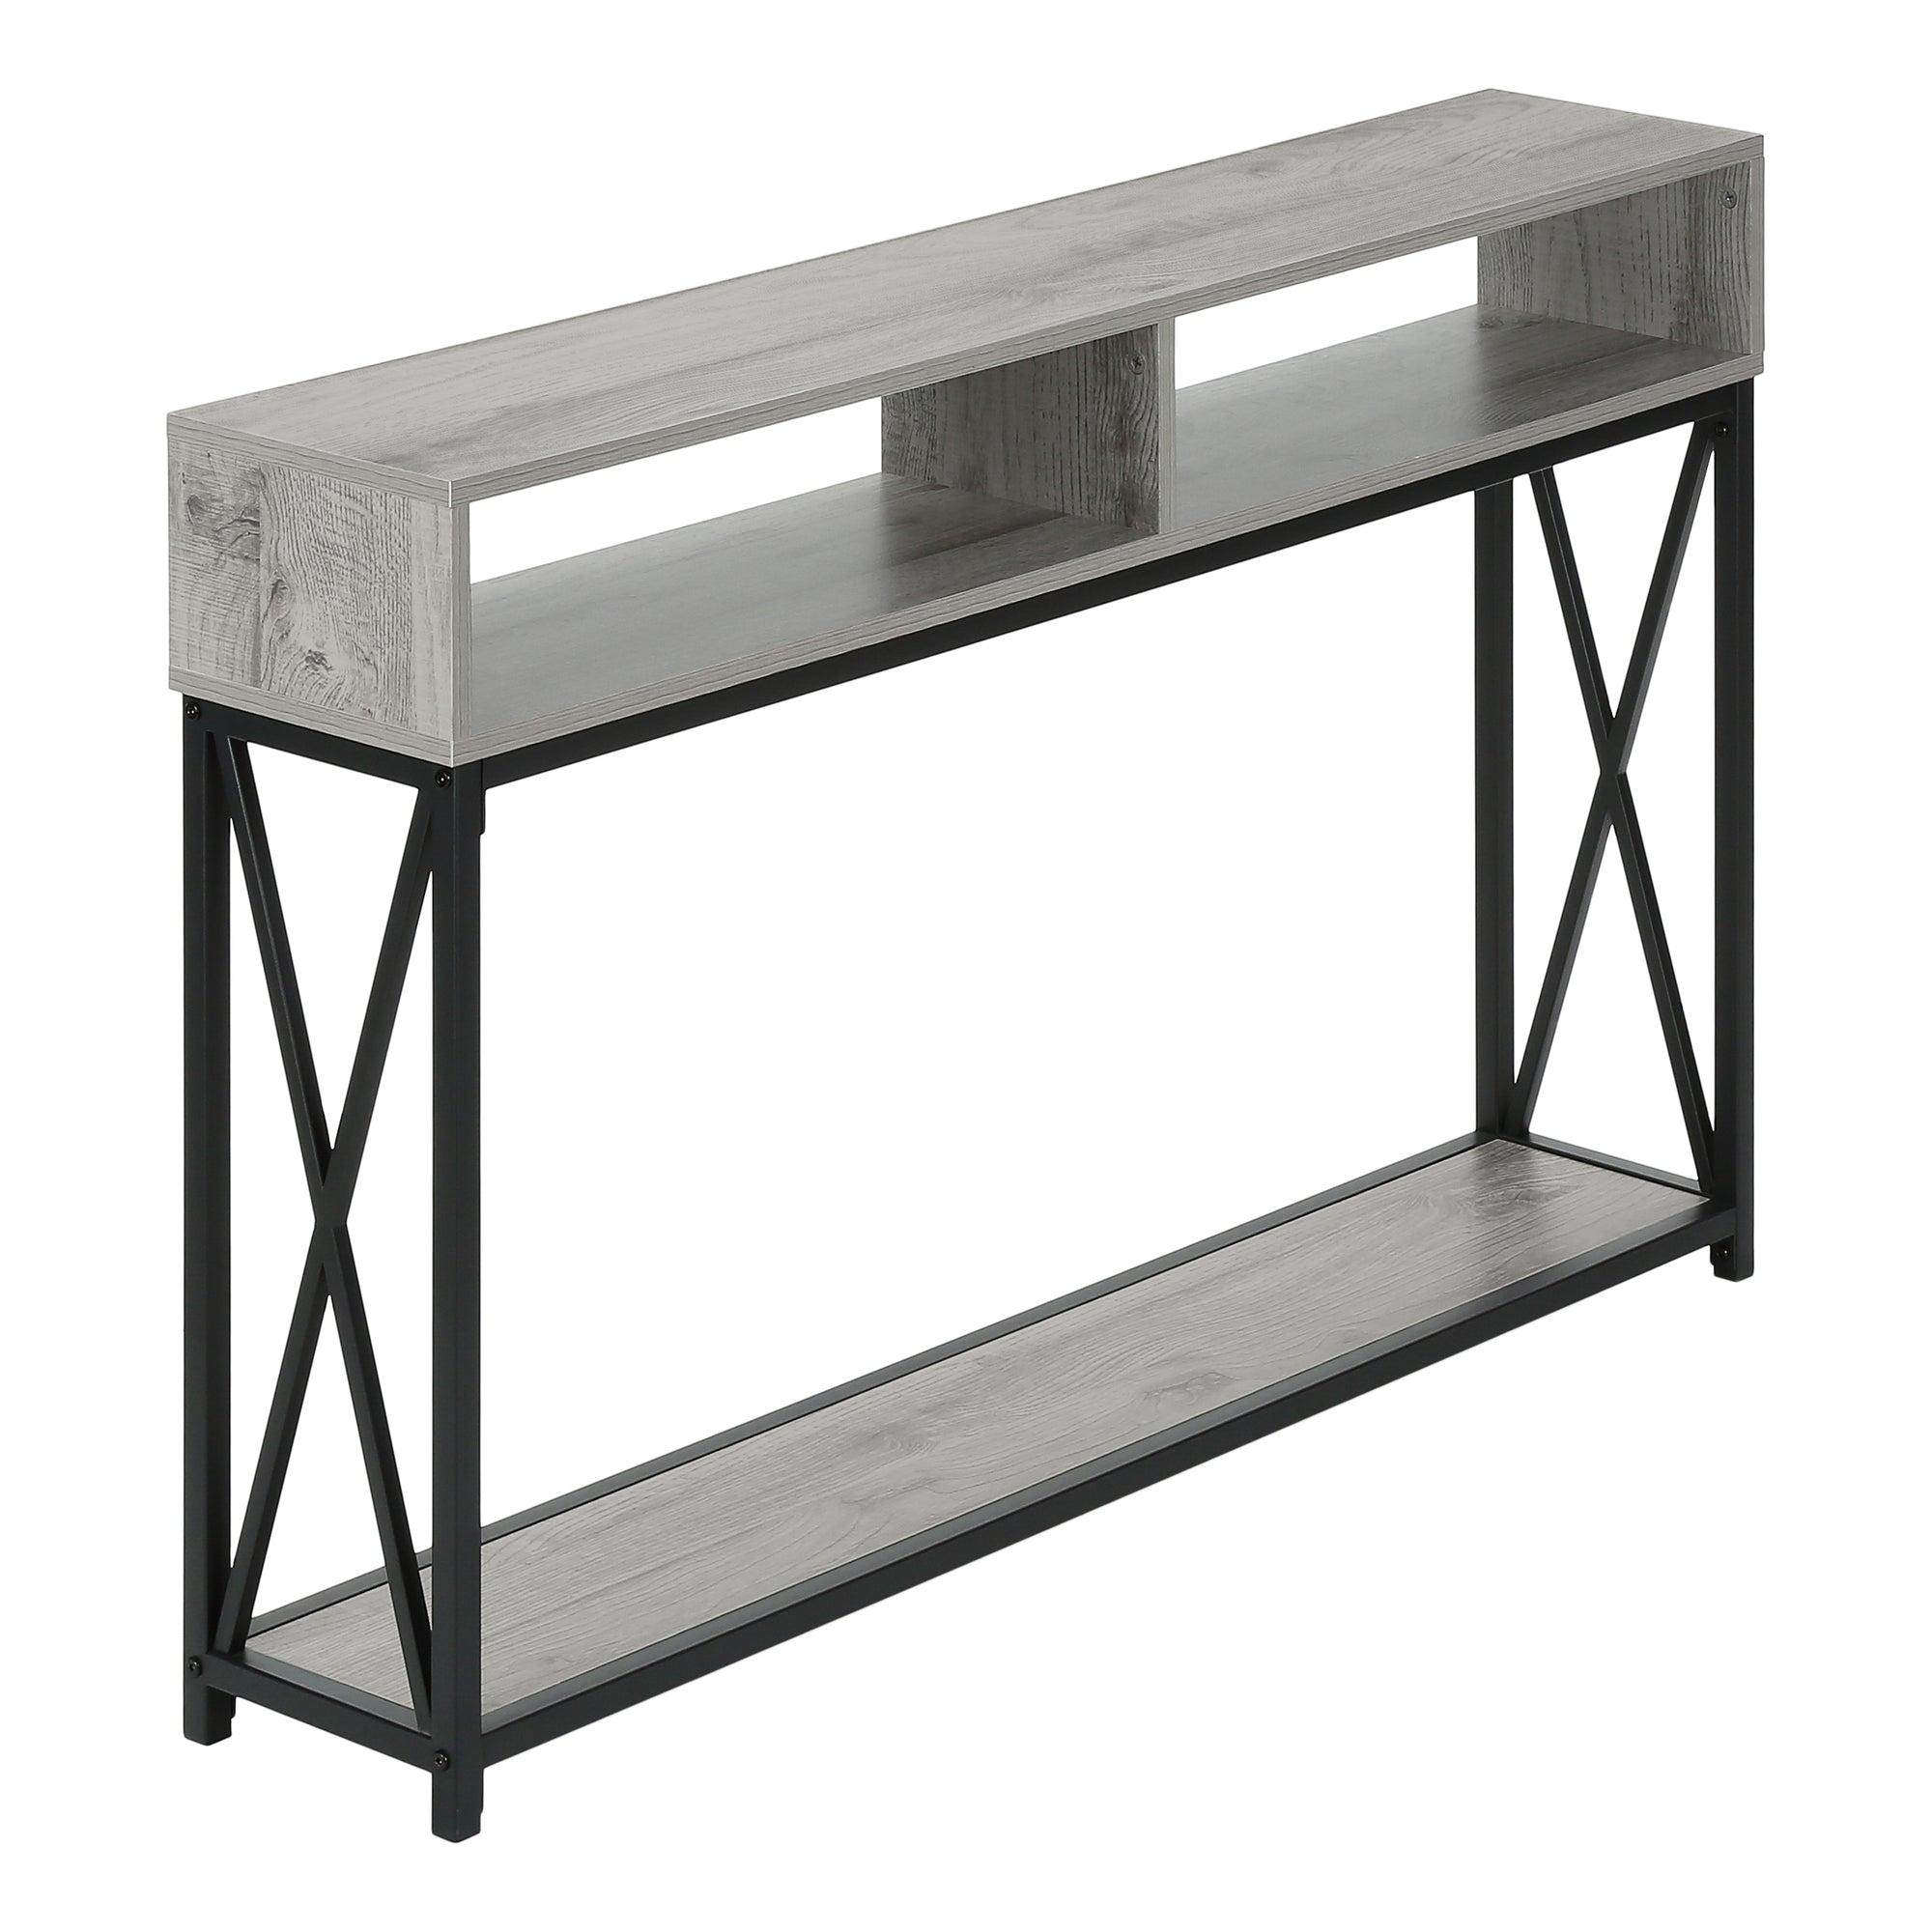 MN-363572    Accent Table, Console, Entryway, Narrow, Sofa, Living Room, Bedroom, Metal Frame, Laminate, Grey, Black, Contemporary, Modern